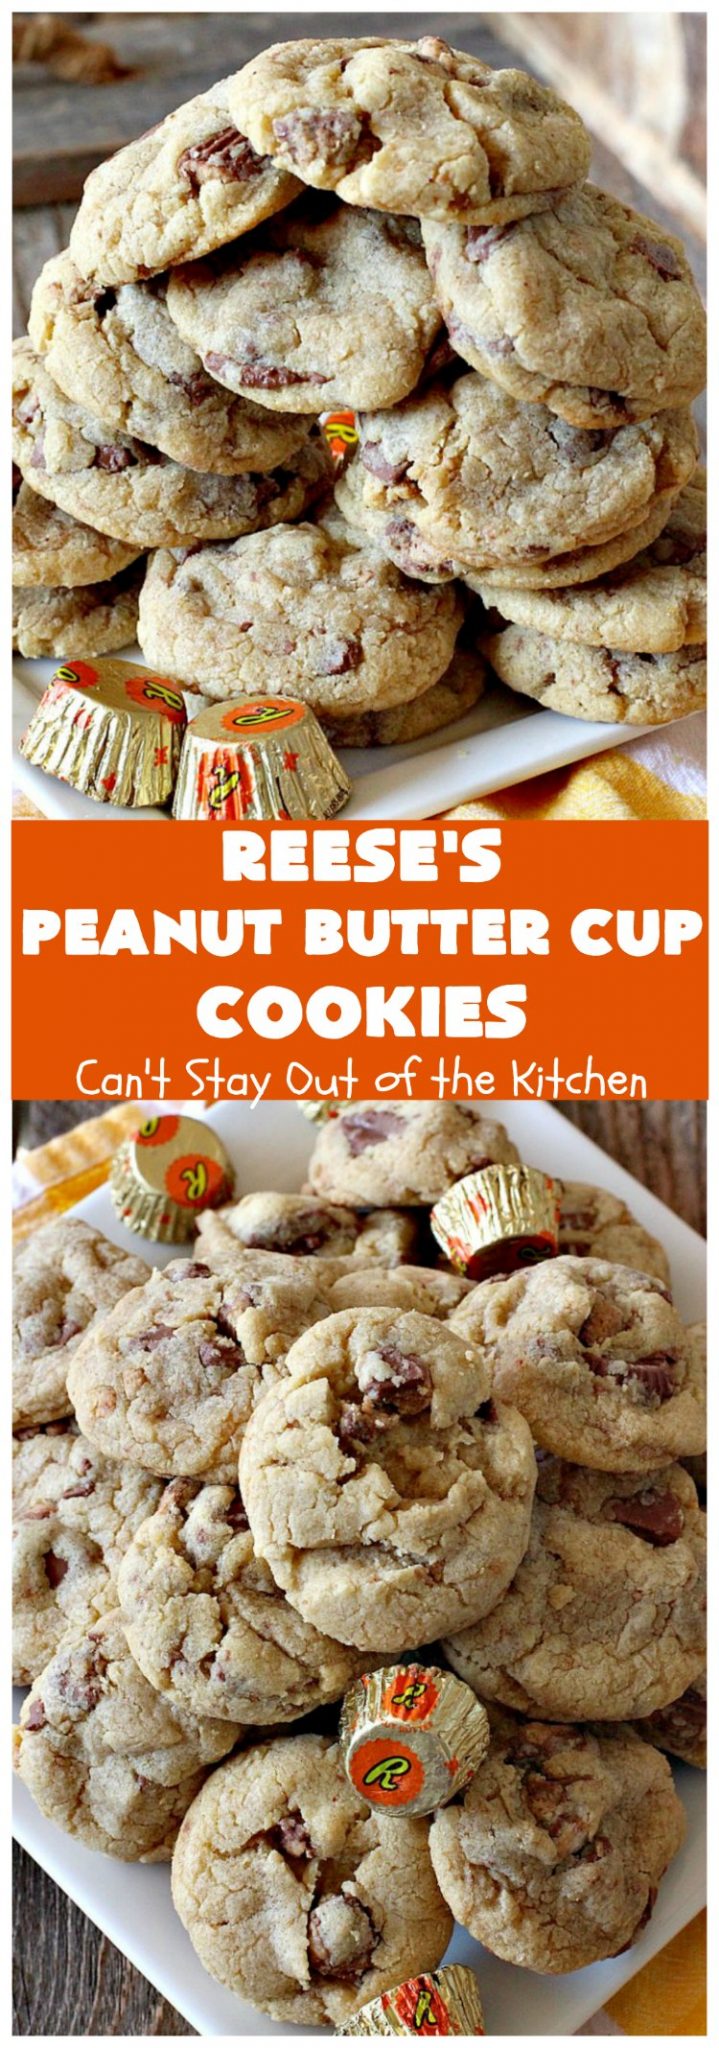 Reese’s Peanut Butter Cup Cookies – Can't Stay Out of the Kitchen